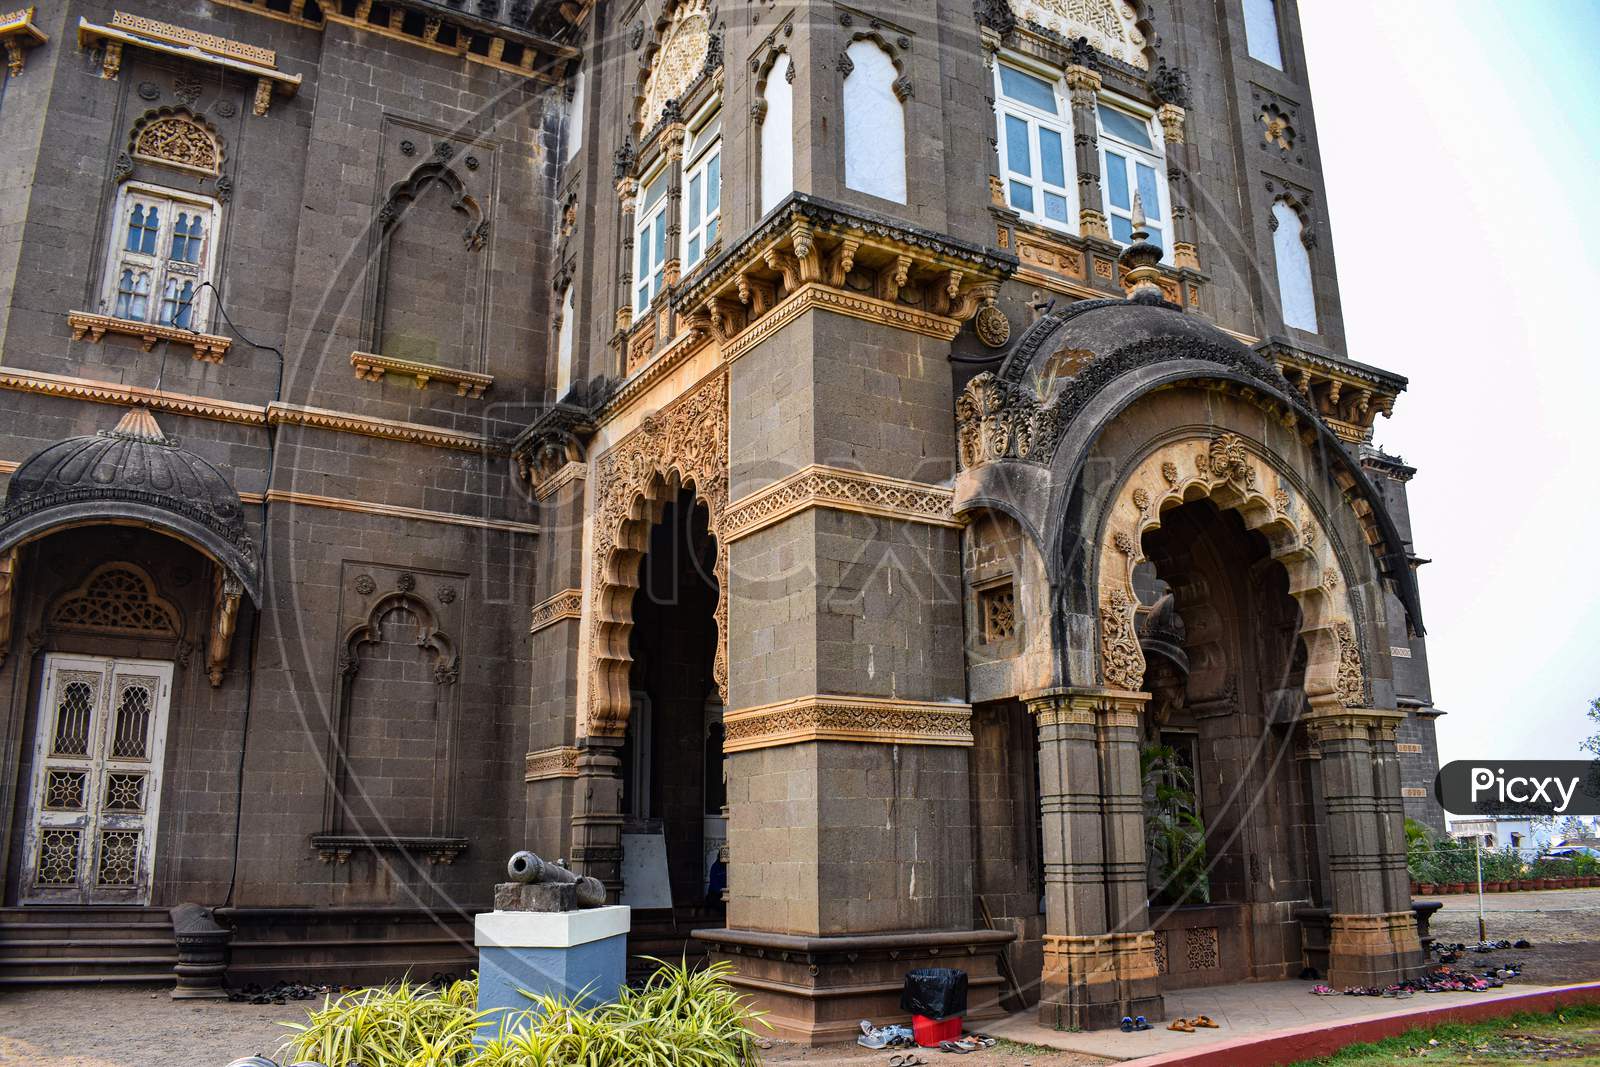 Picture Of Popular Palace In Kolhapur City New Palace, Ancient Palace Constructed From Black Rock.